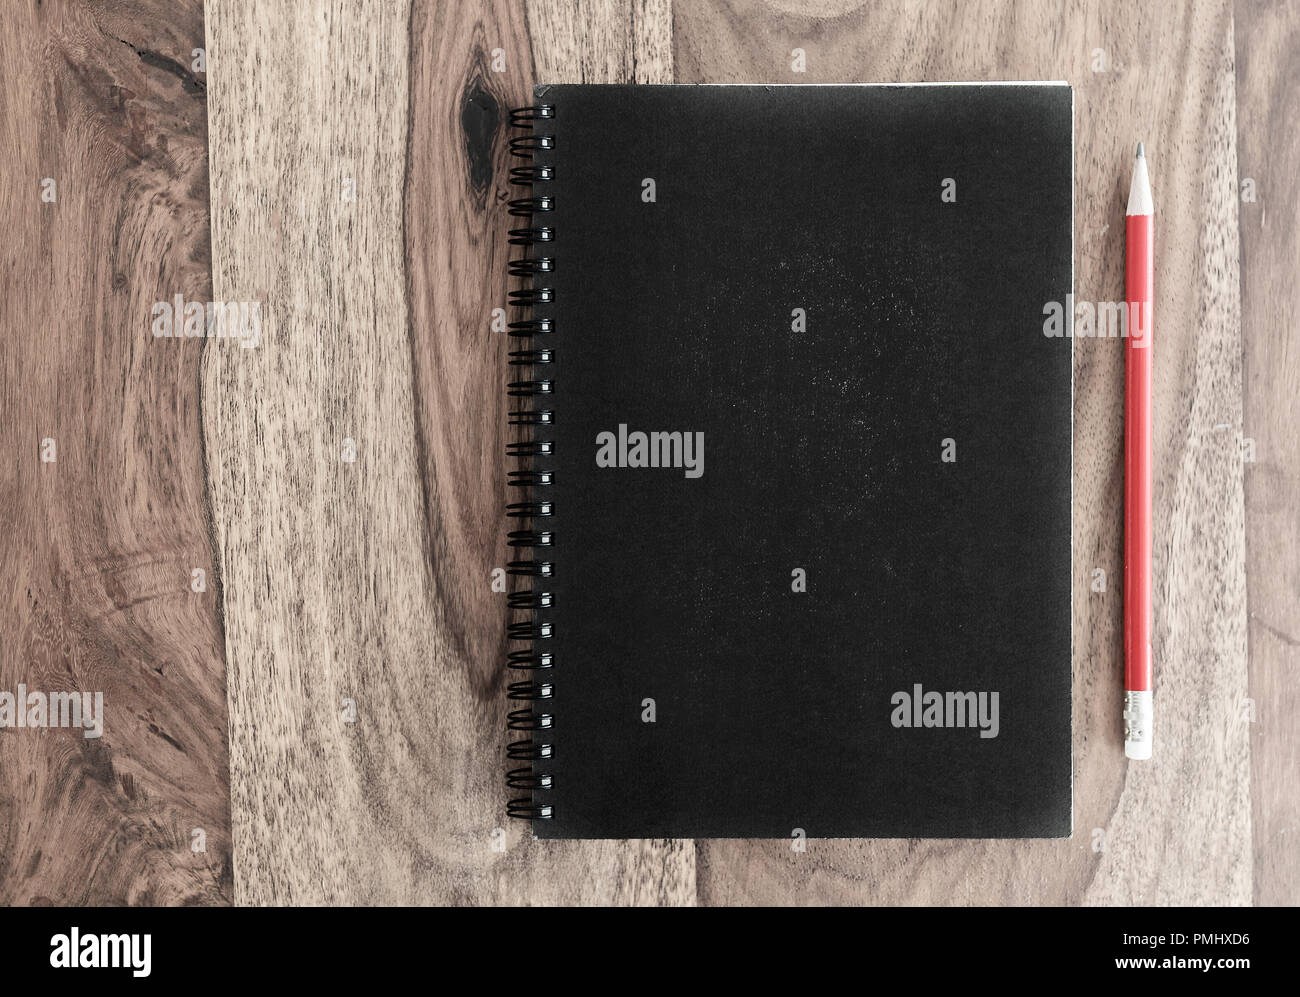 closed black spiral notebook and pencil on wooden desk Stock Photo